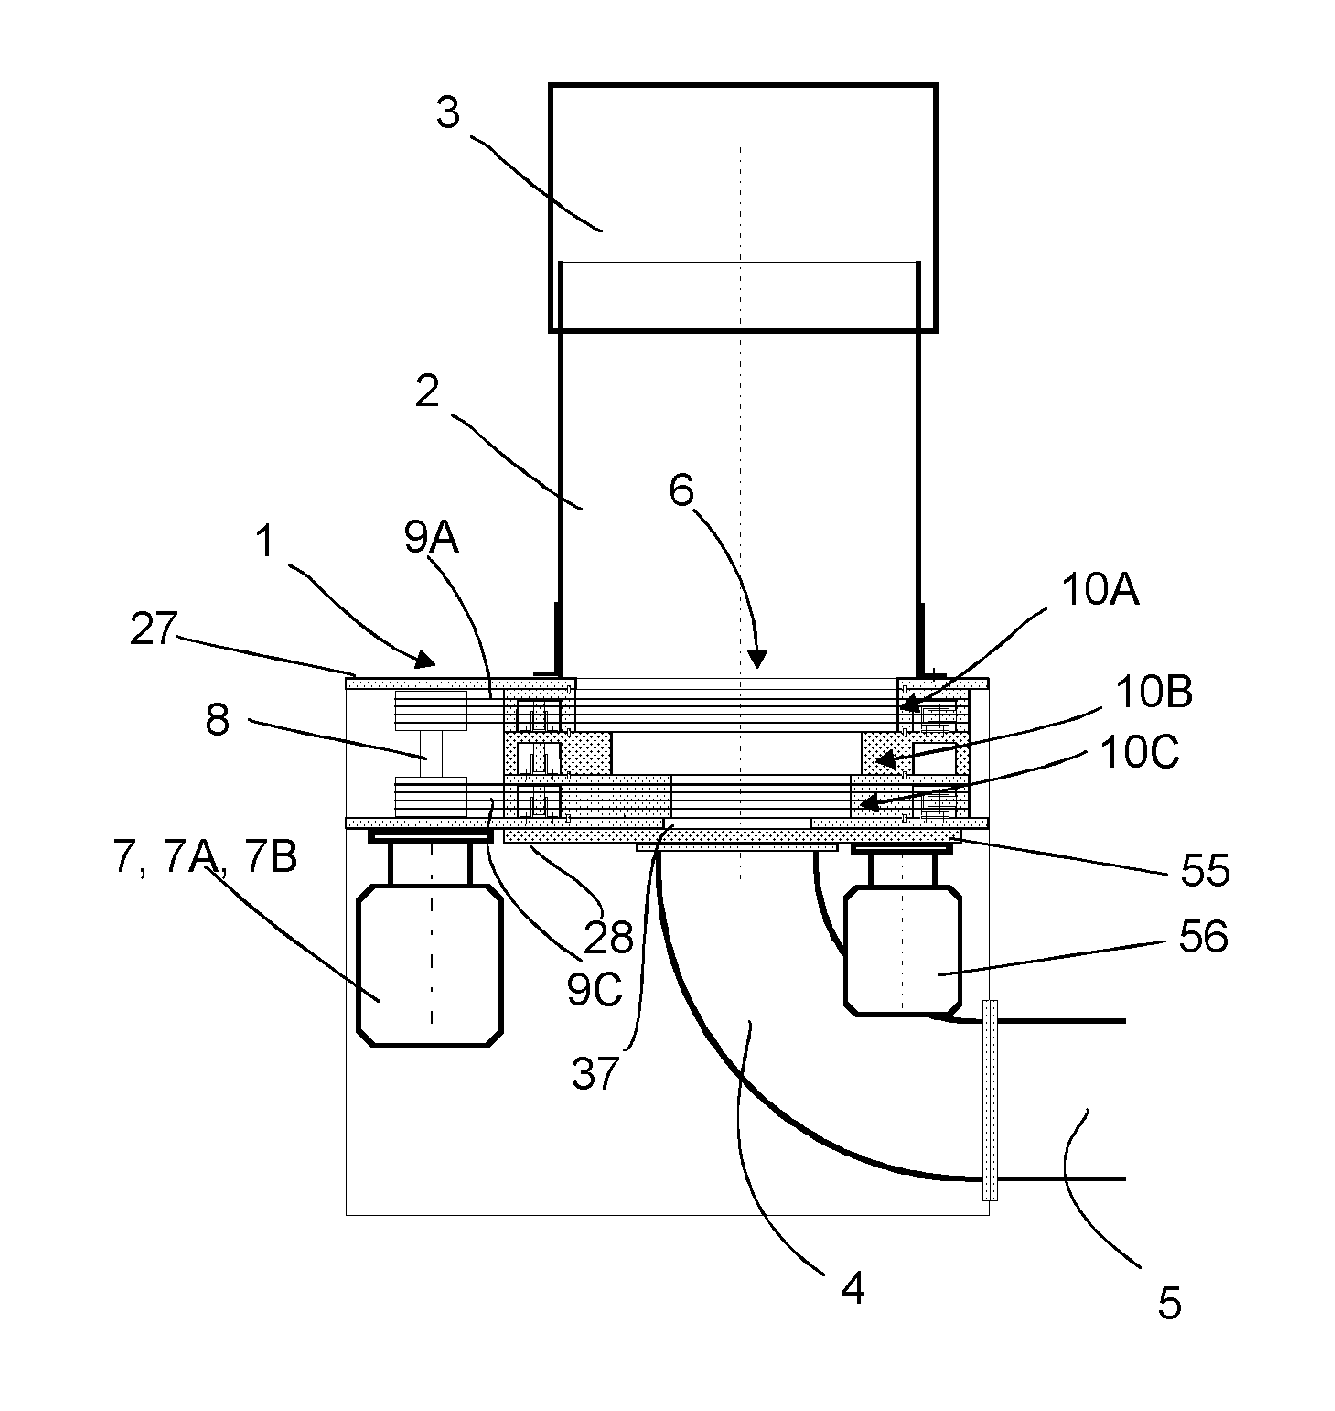 Method and apparatus for handling material in a pneumatic materials handling system